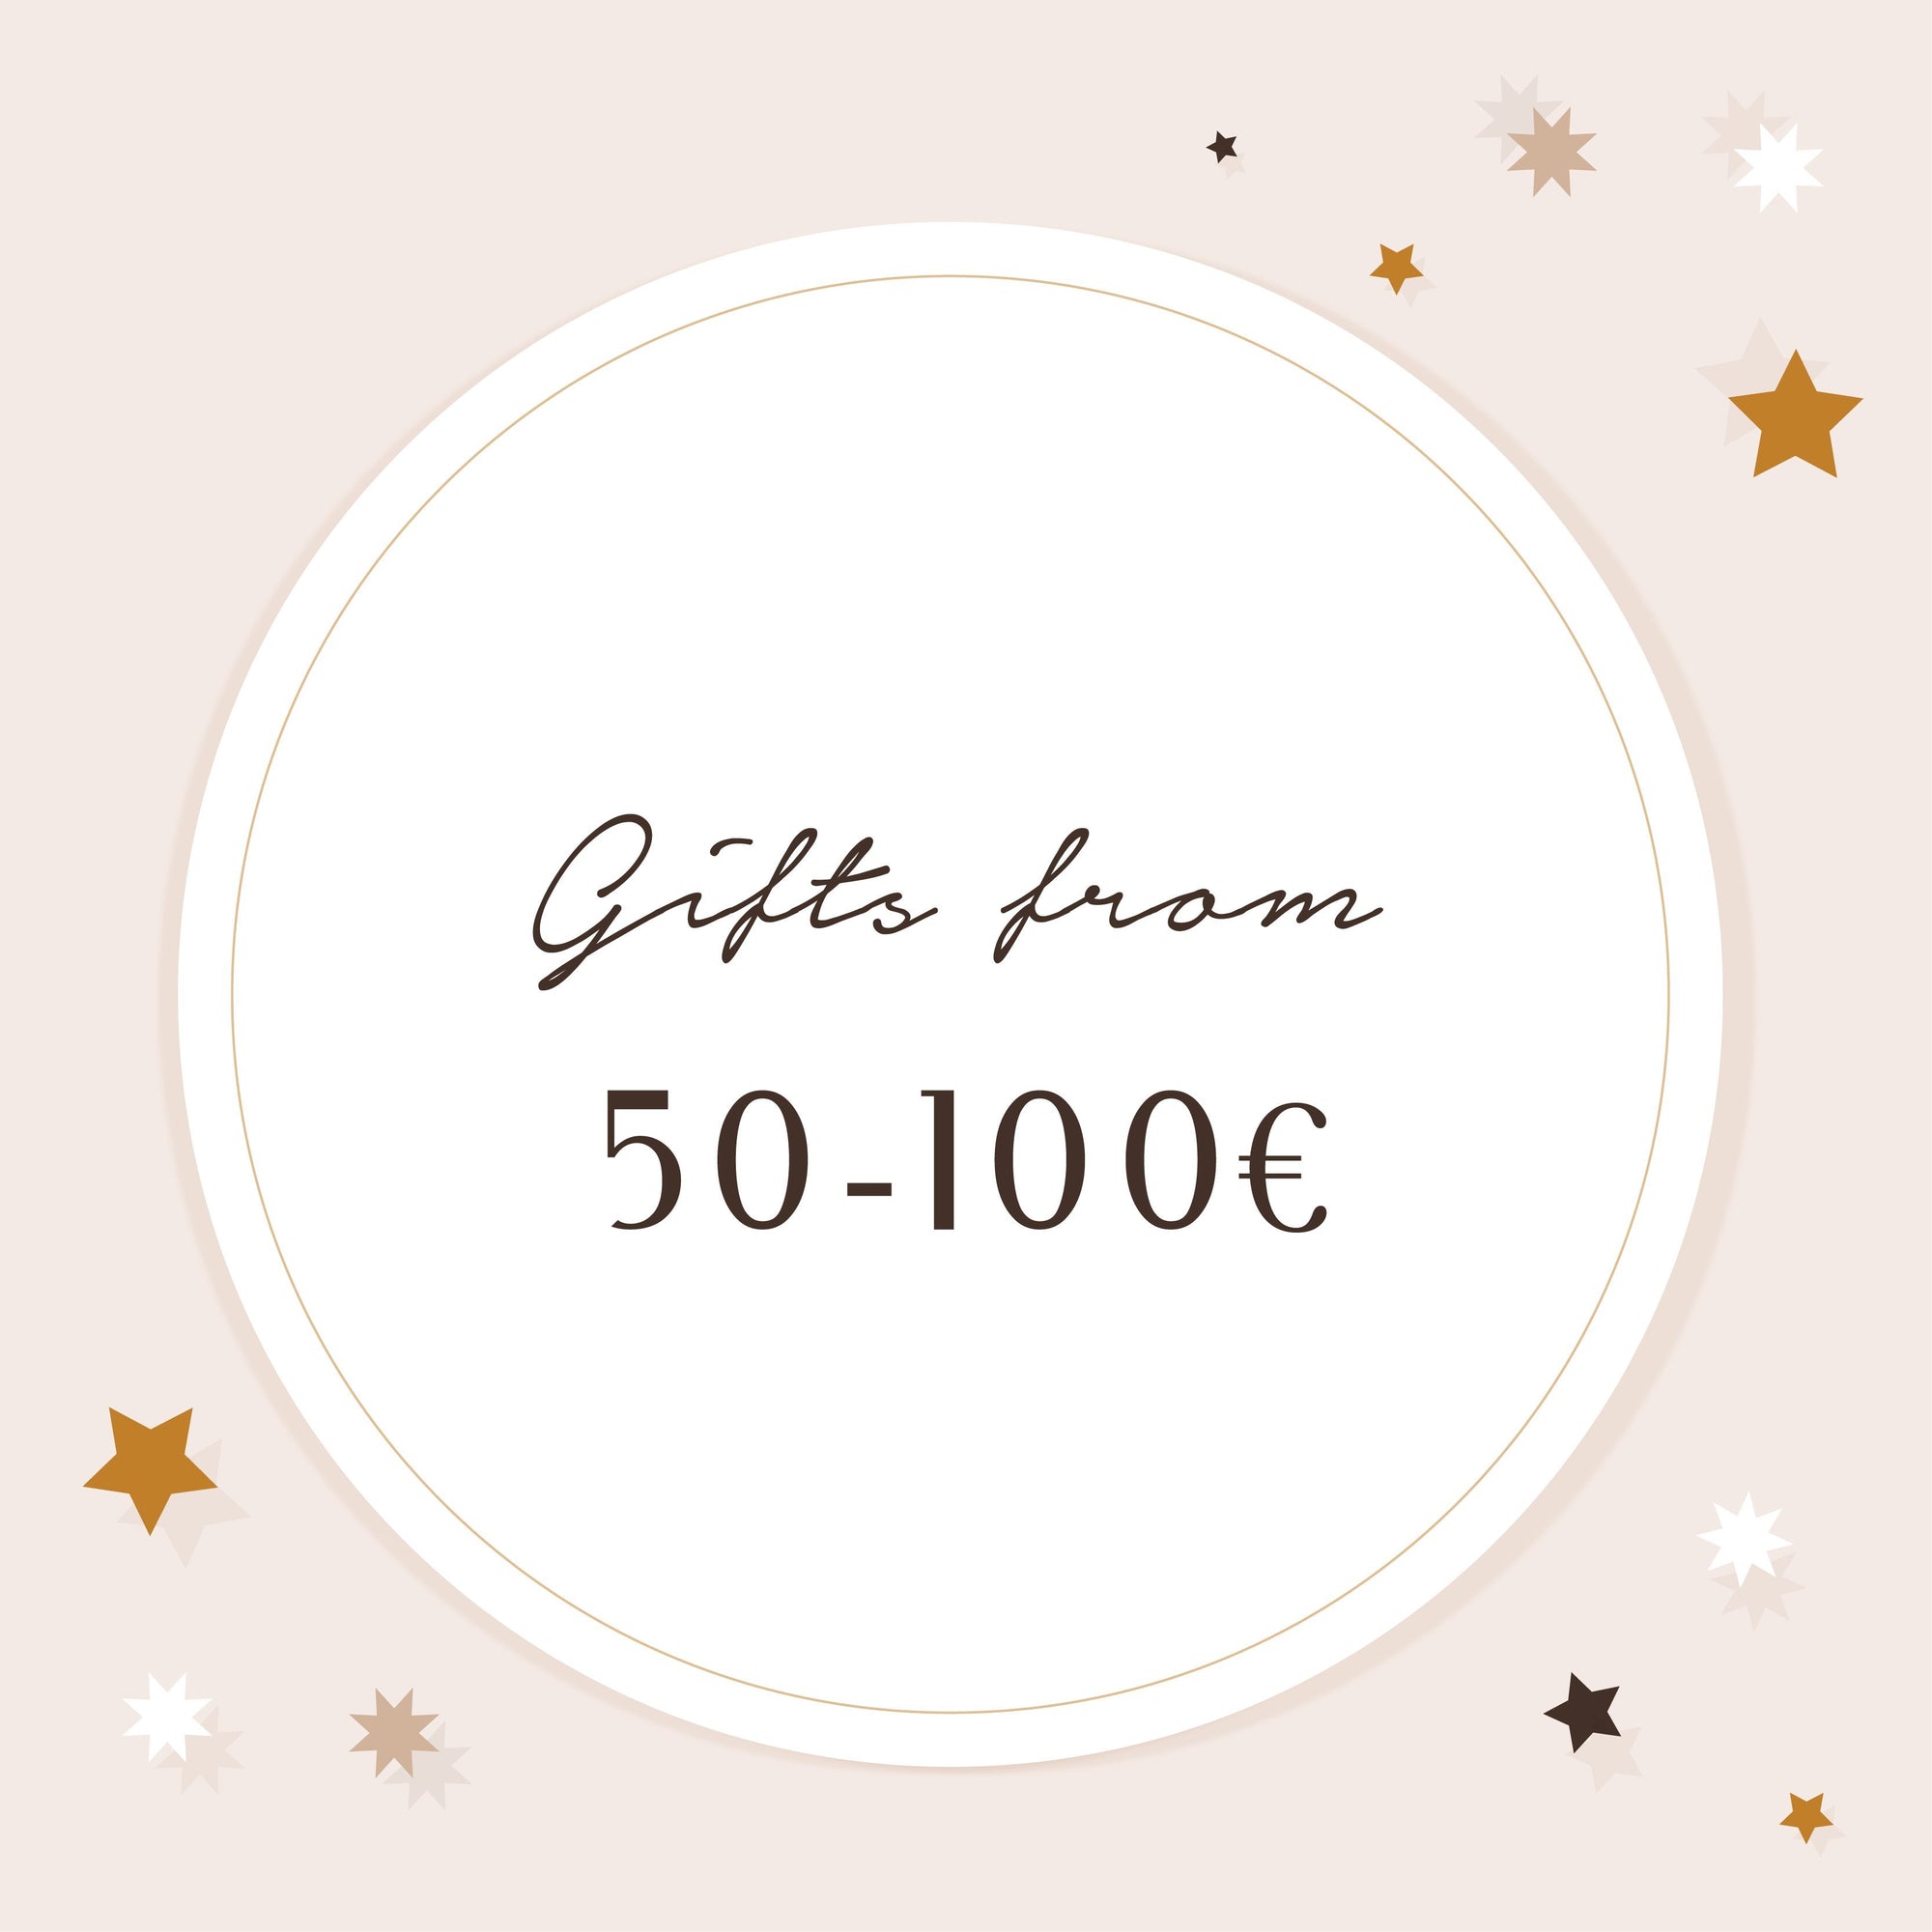 Gifts from 50-100€ - Genuine Selection